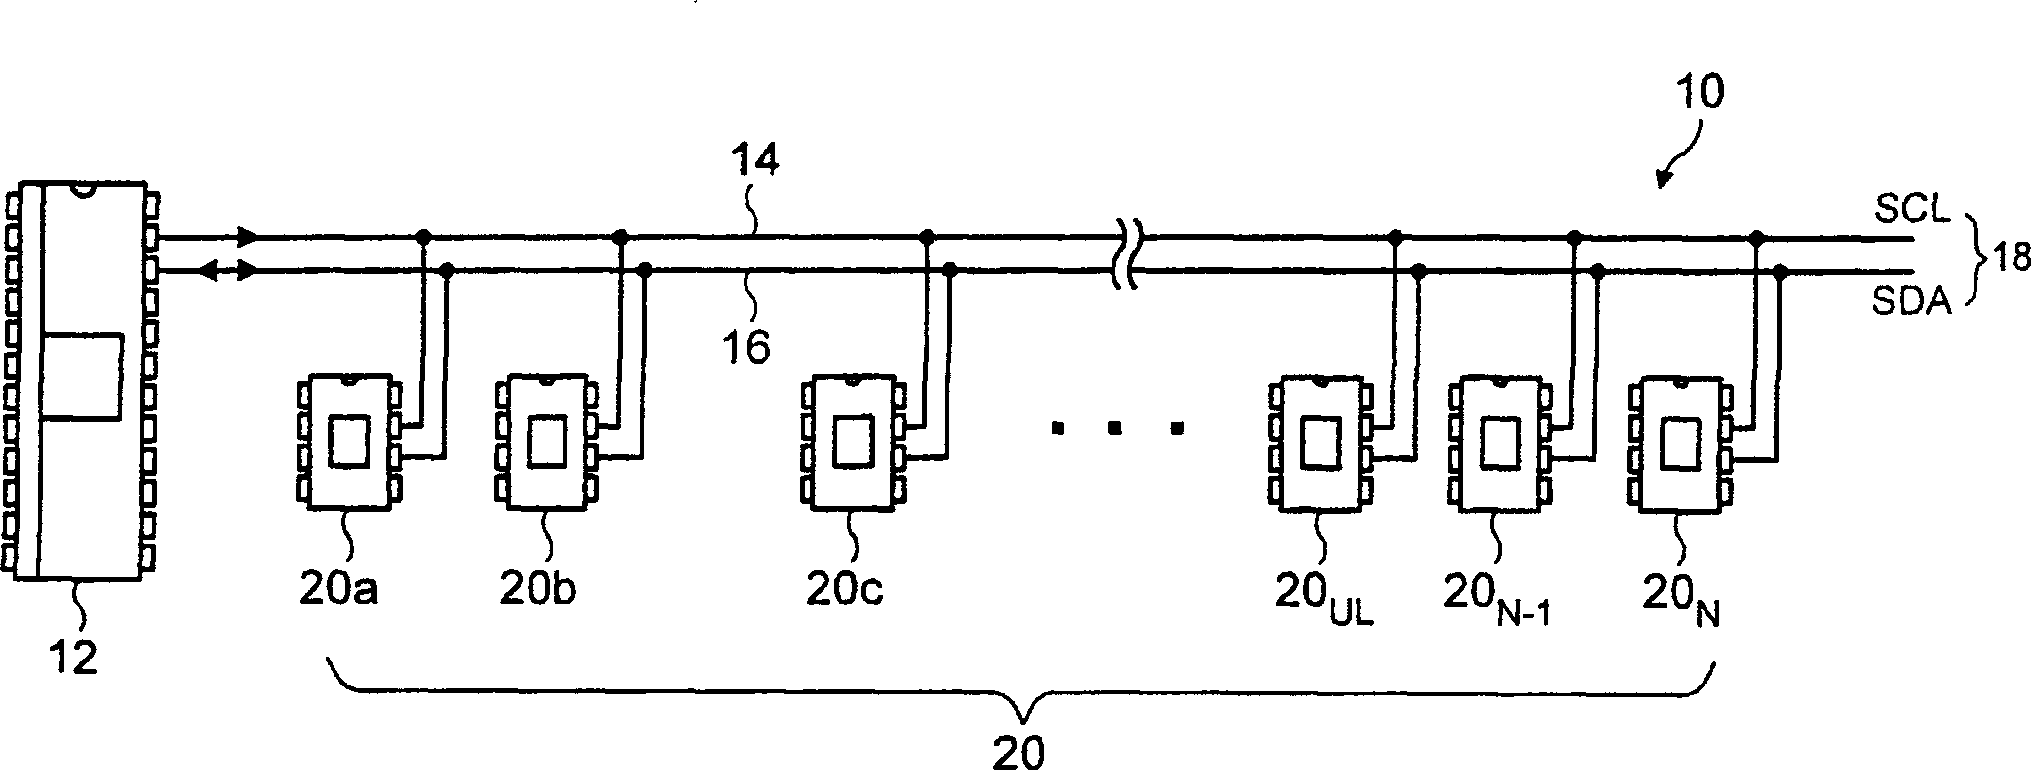 Integrated circuit having programmable address in integrated circuit environment